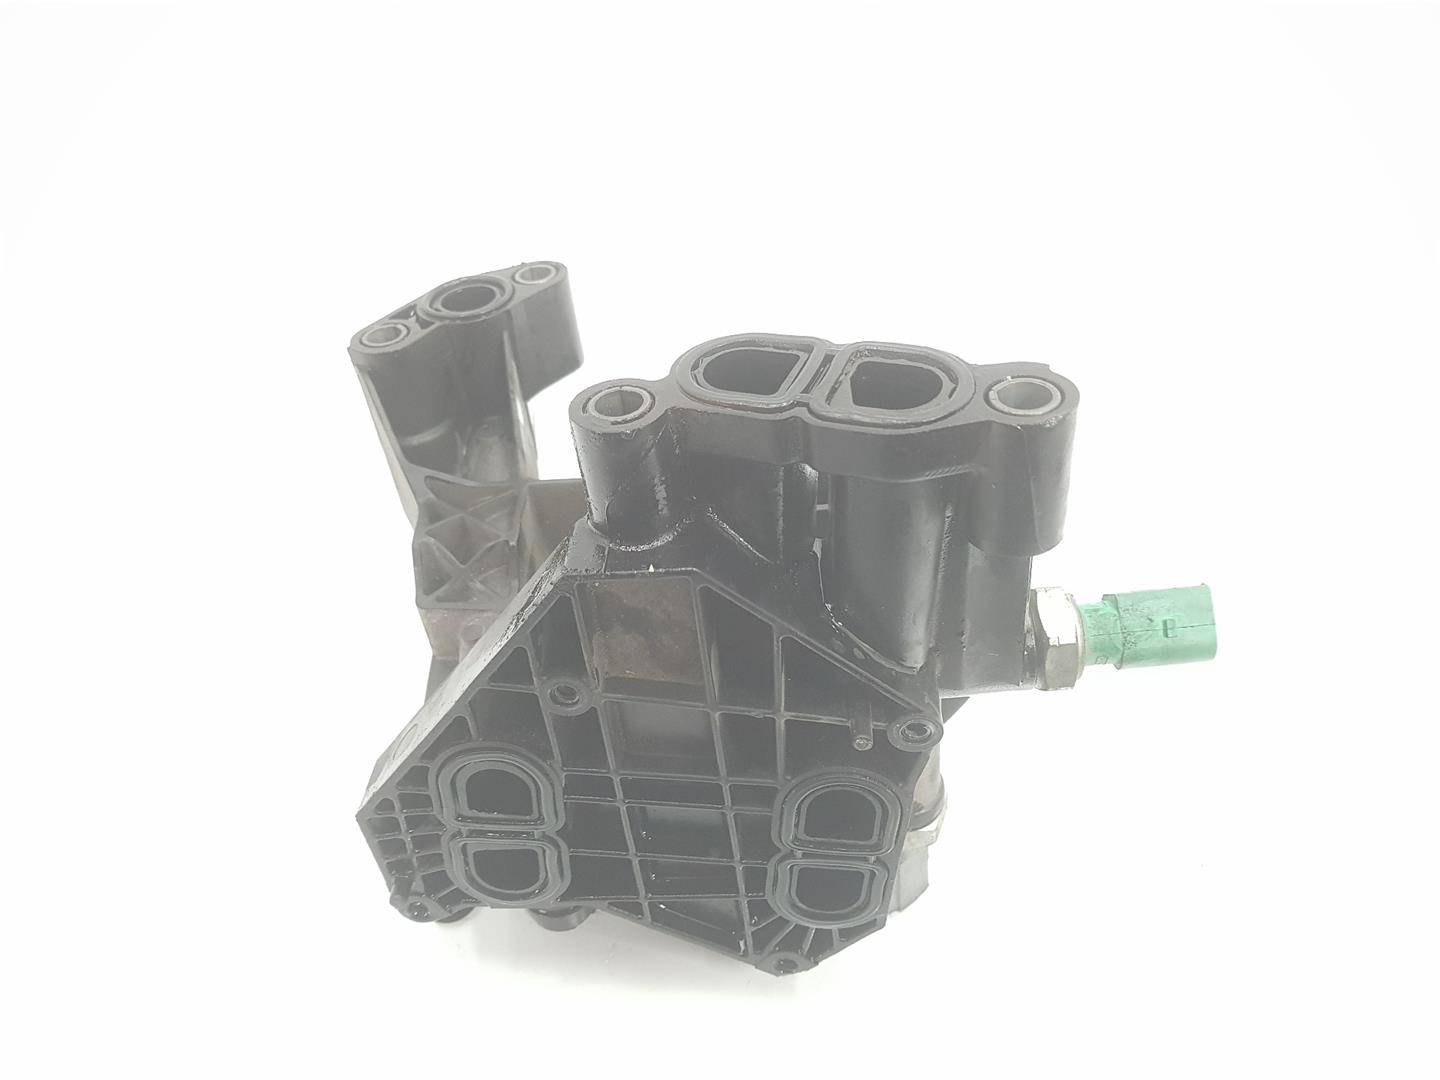 VOLKSWAGEN Golf 7 generation (2012-2024) Other Engine Compartment Parts 03N115389A, 03N115389A, 1151CB 24543602